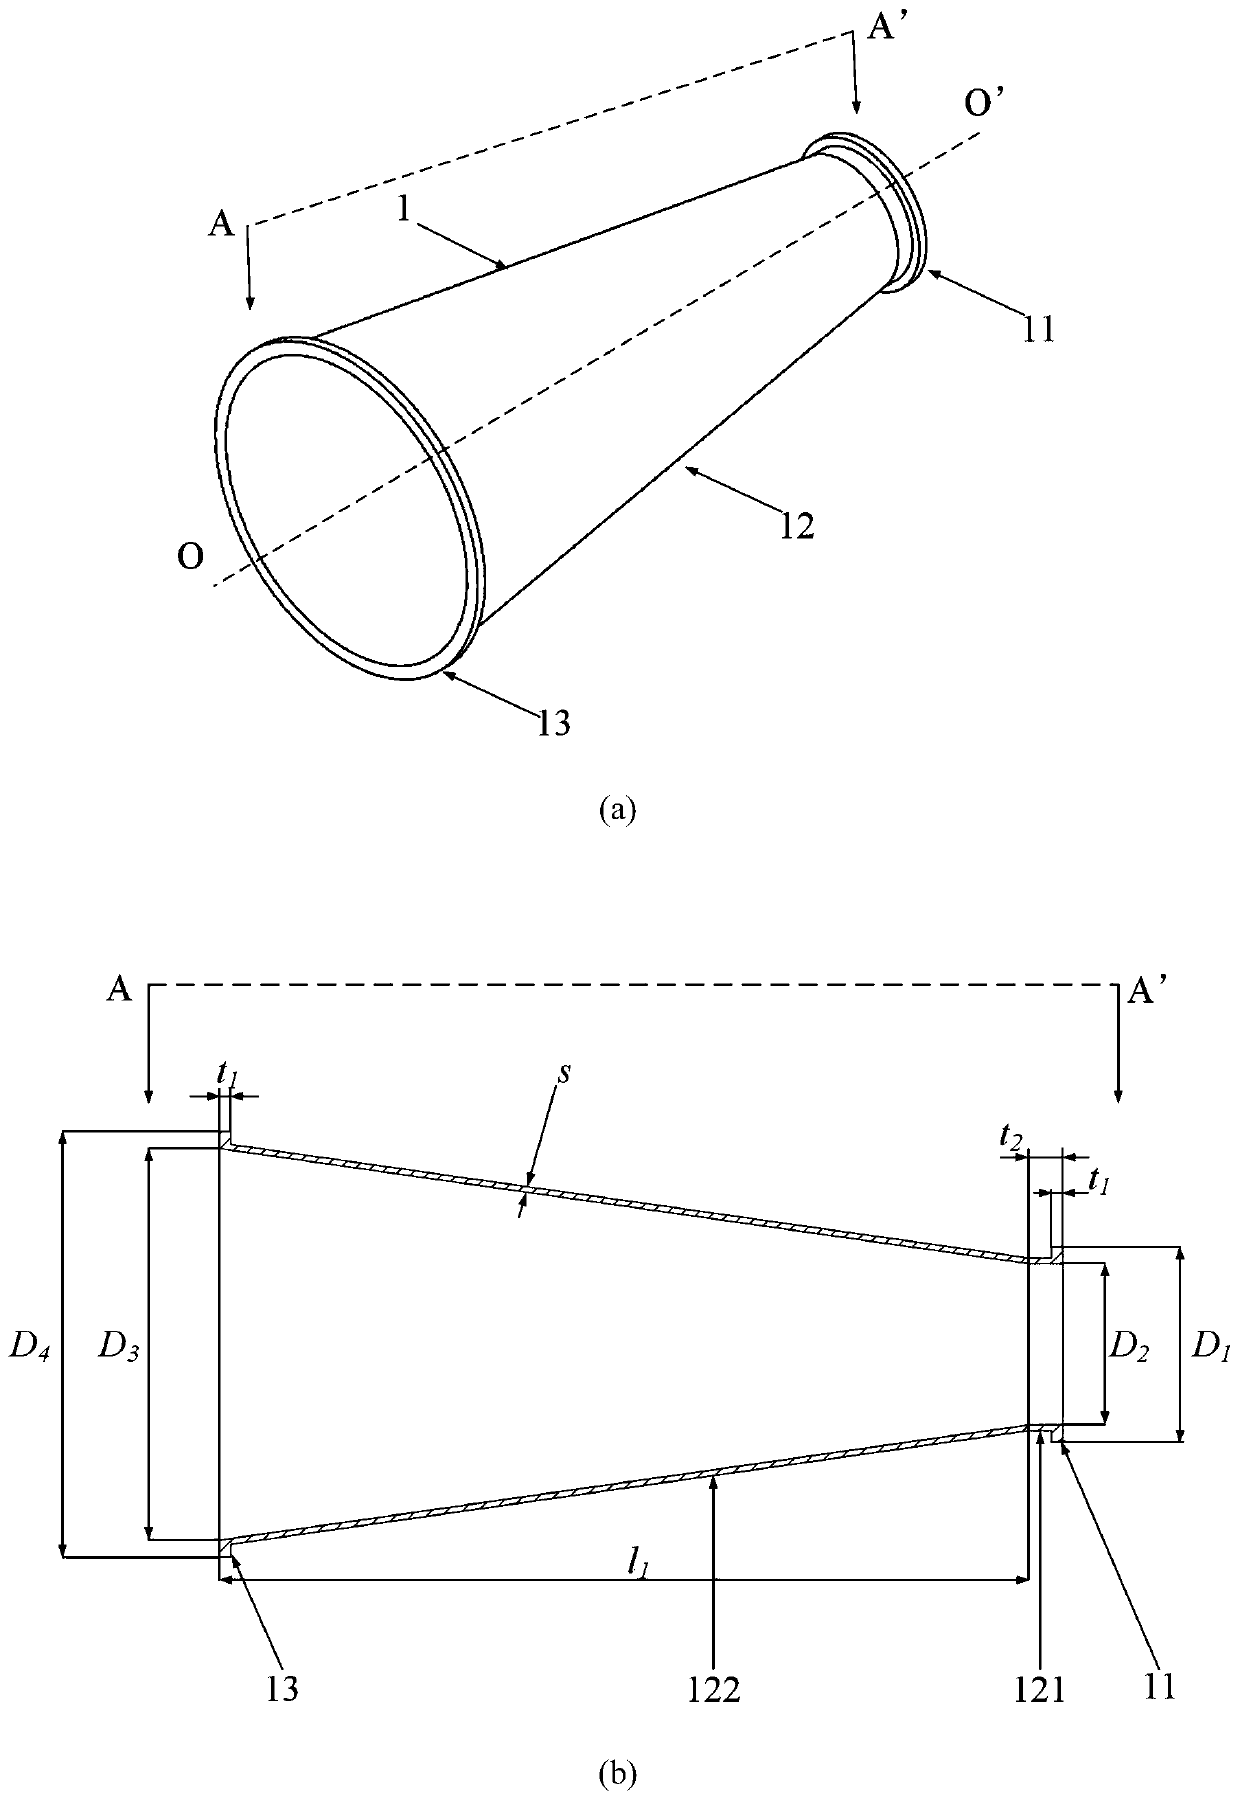 High-power mode conversion super-lens antenna capable of realizing beam deflection